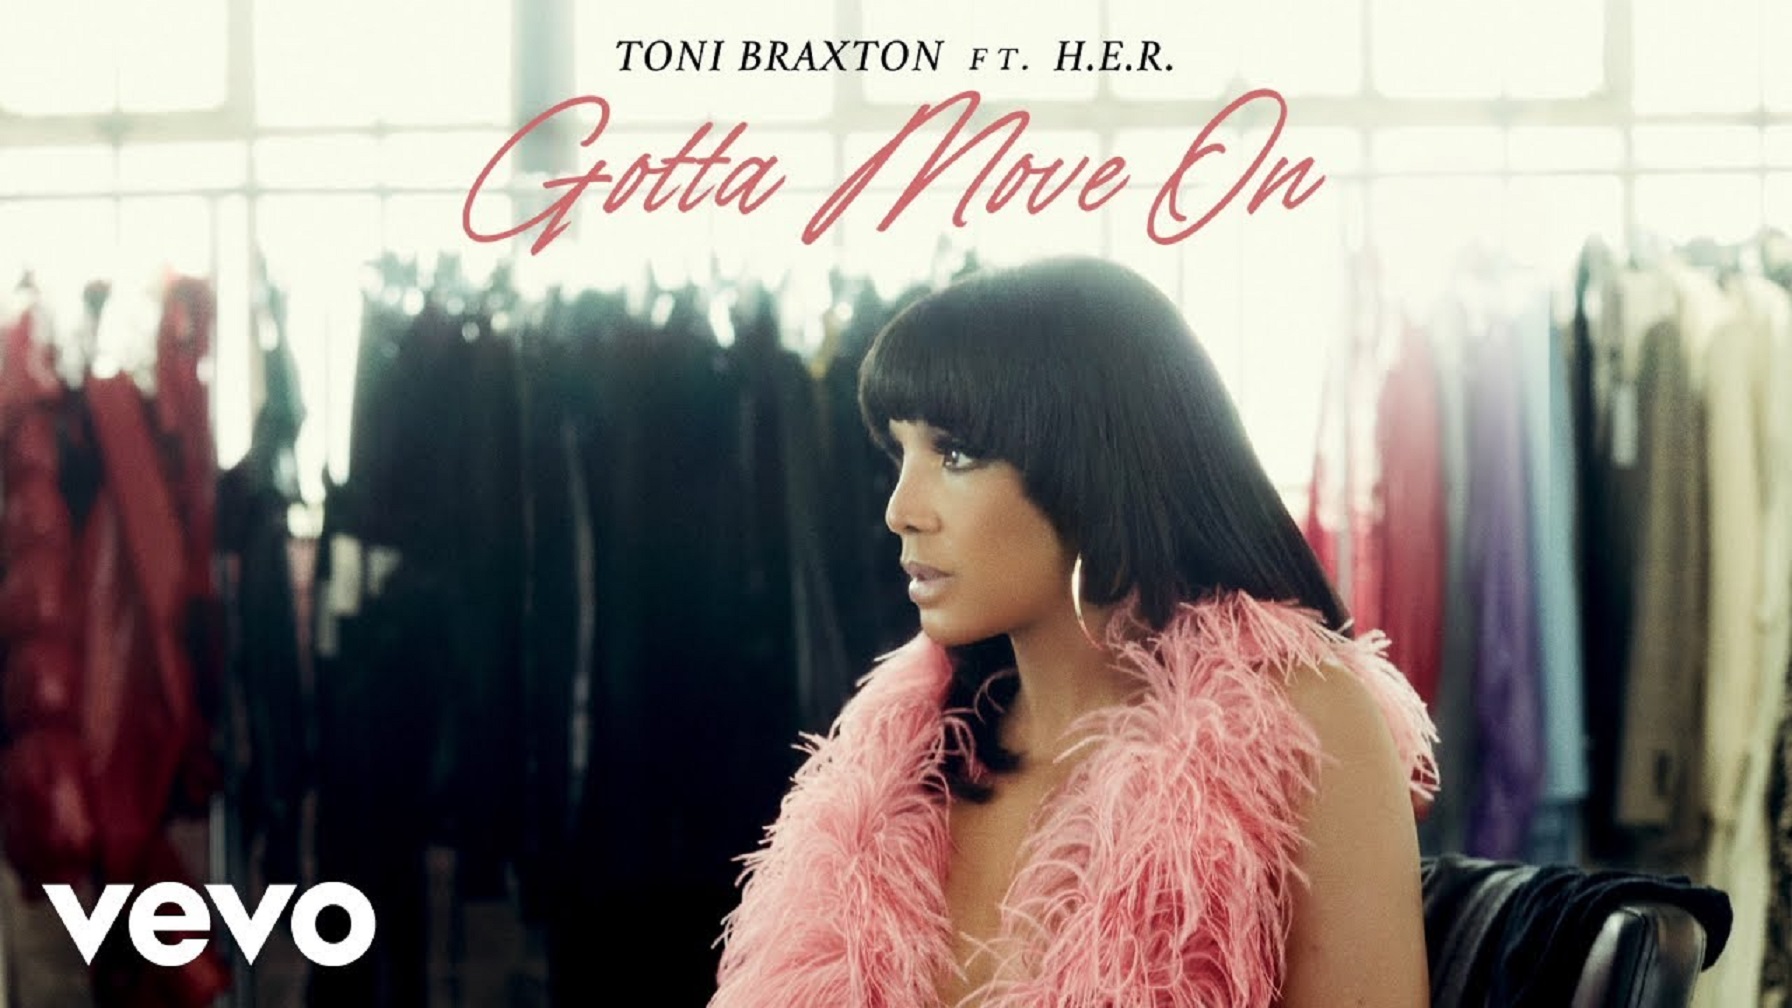 Listen To Toni Braxton’s Sensational New Song ‘Gotta Move On’ Feat. H.E.R